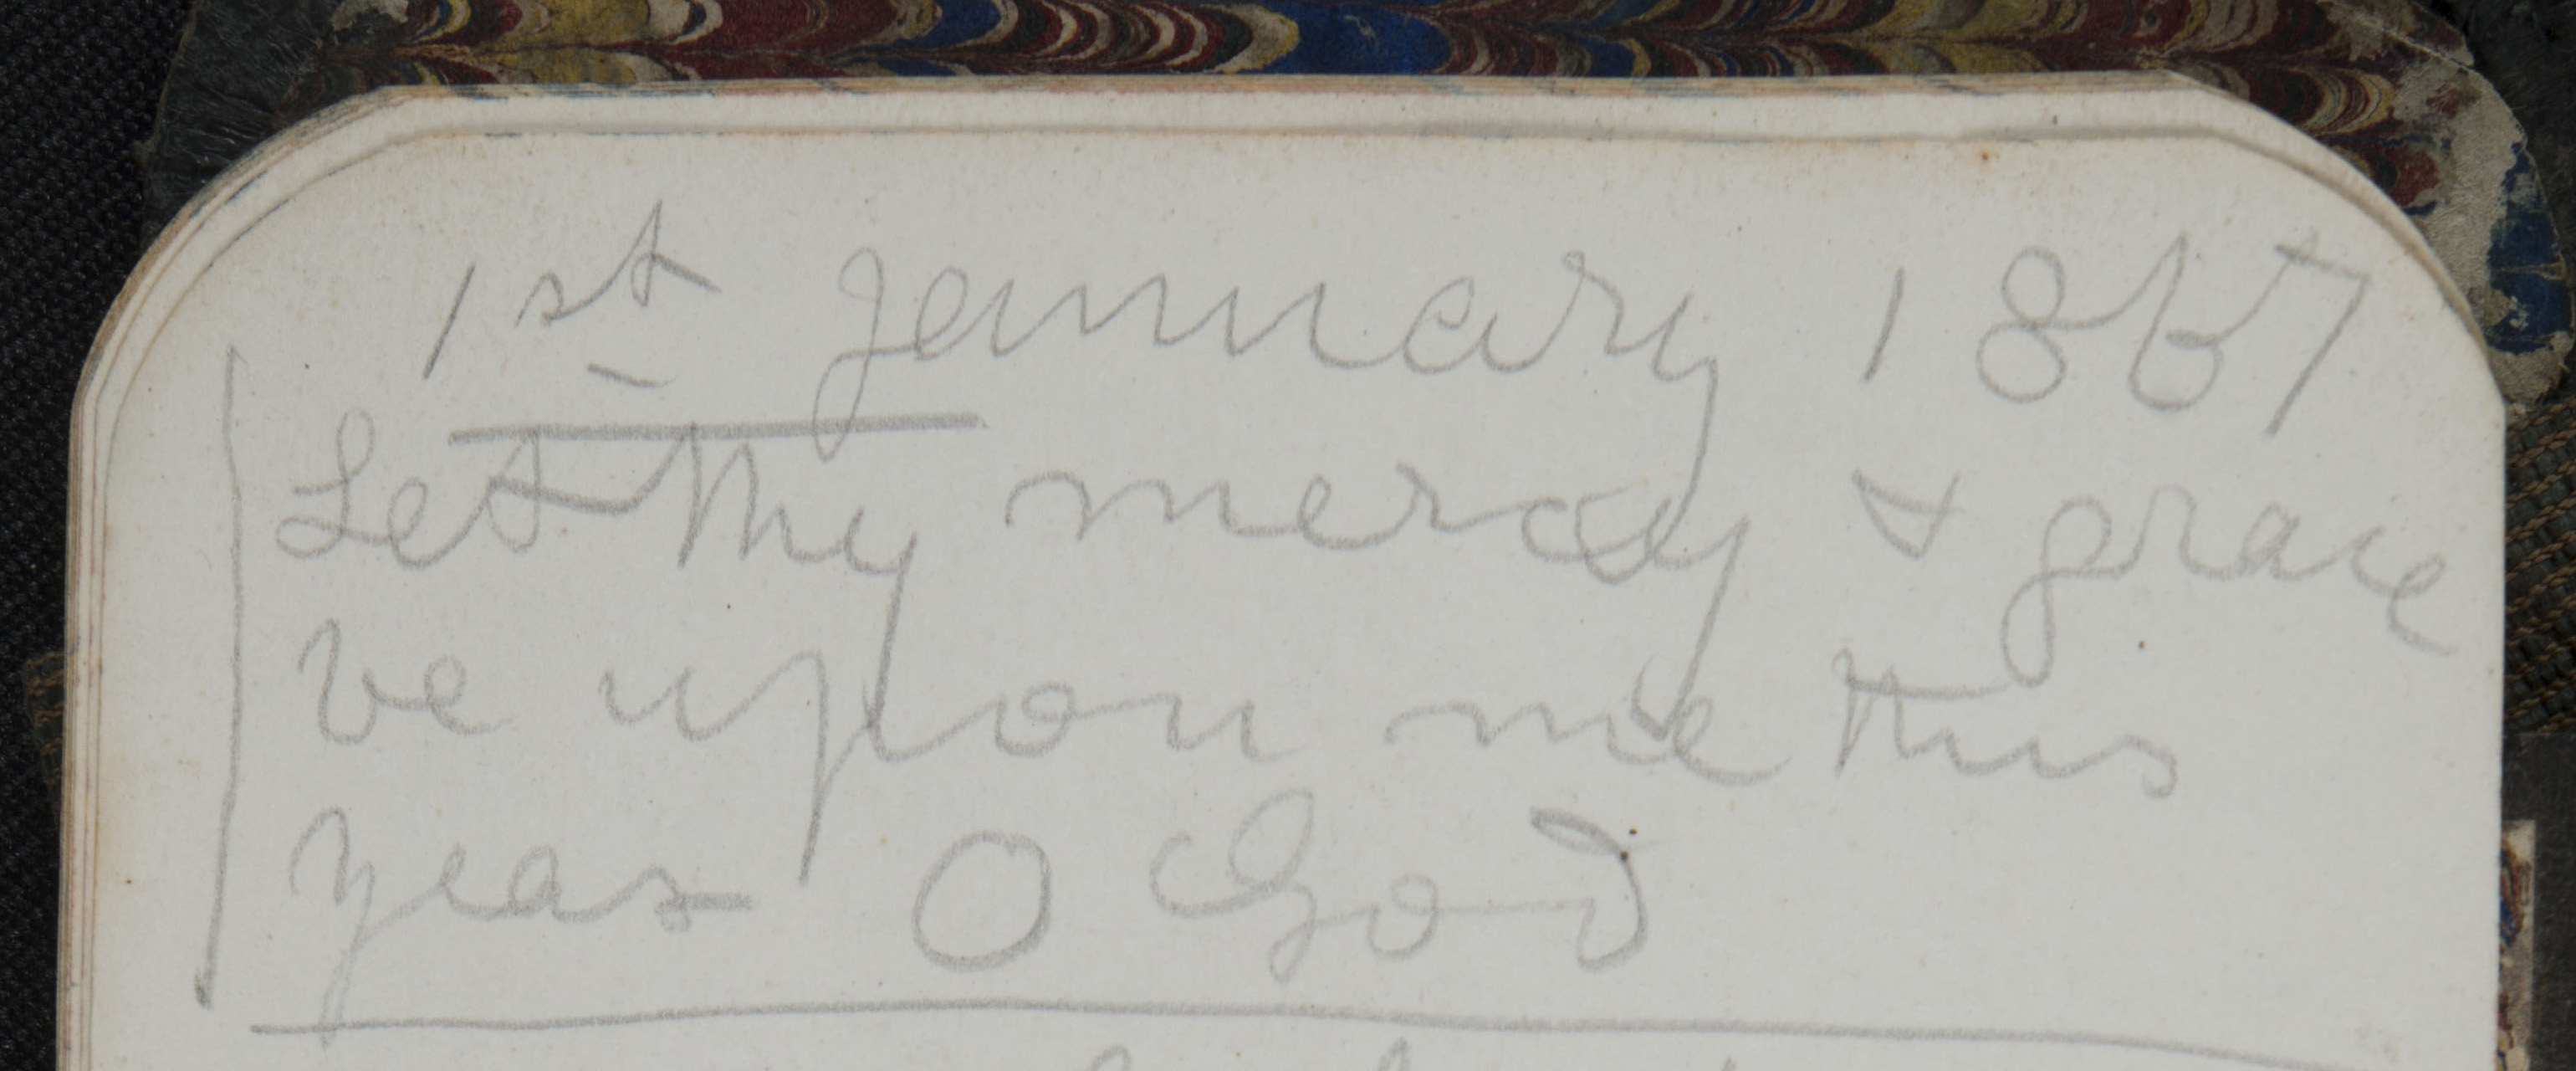 An image of a page of Field Diary VII (Livingstone 1866f:[25]), detail. Copyright David Livingstone Centre. Creative Commons Attribution-NonCommercial 3.0 Unported (https://creativecommons.org/licenses/by-nc/3.0/).